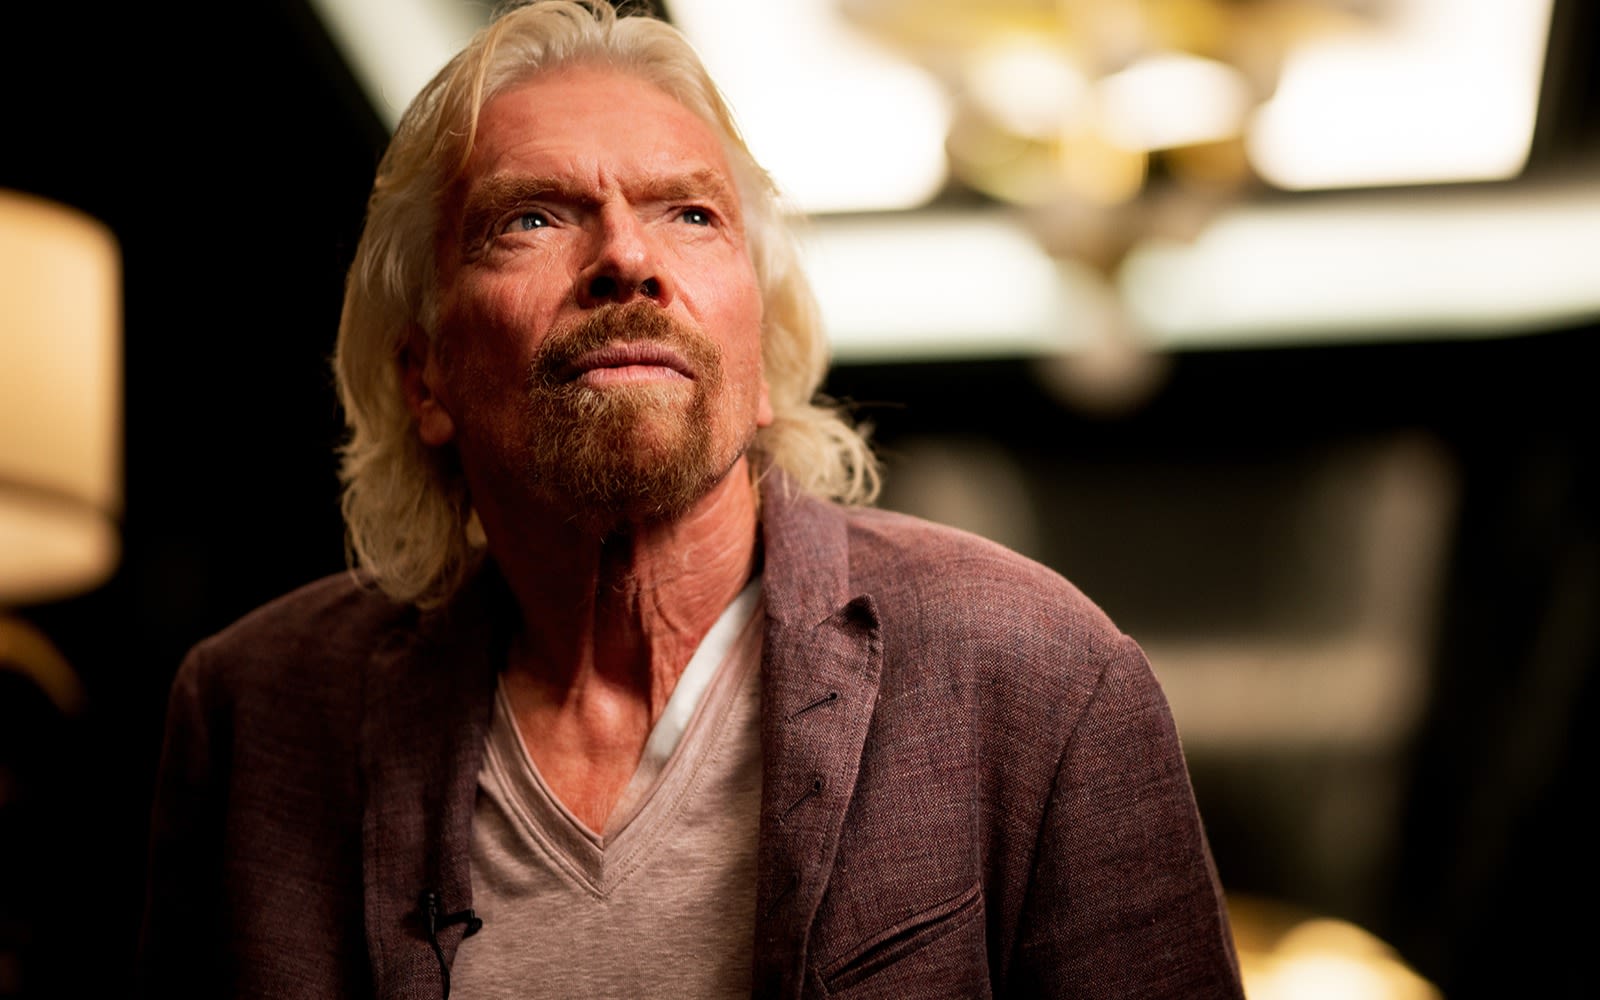 Picture of Richard Branson looking serious/contenplating 